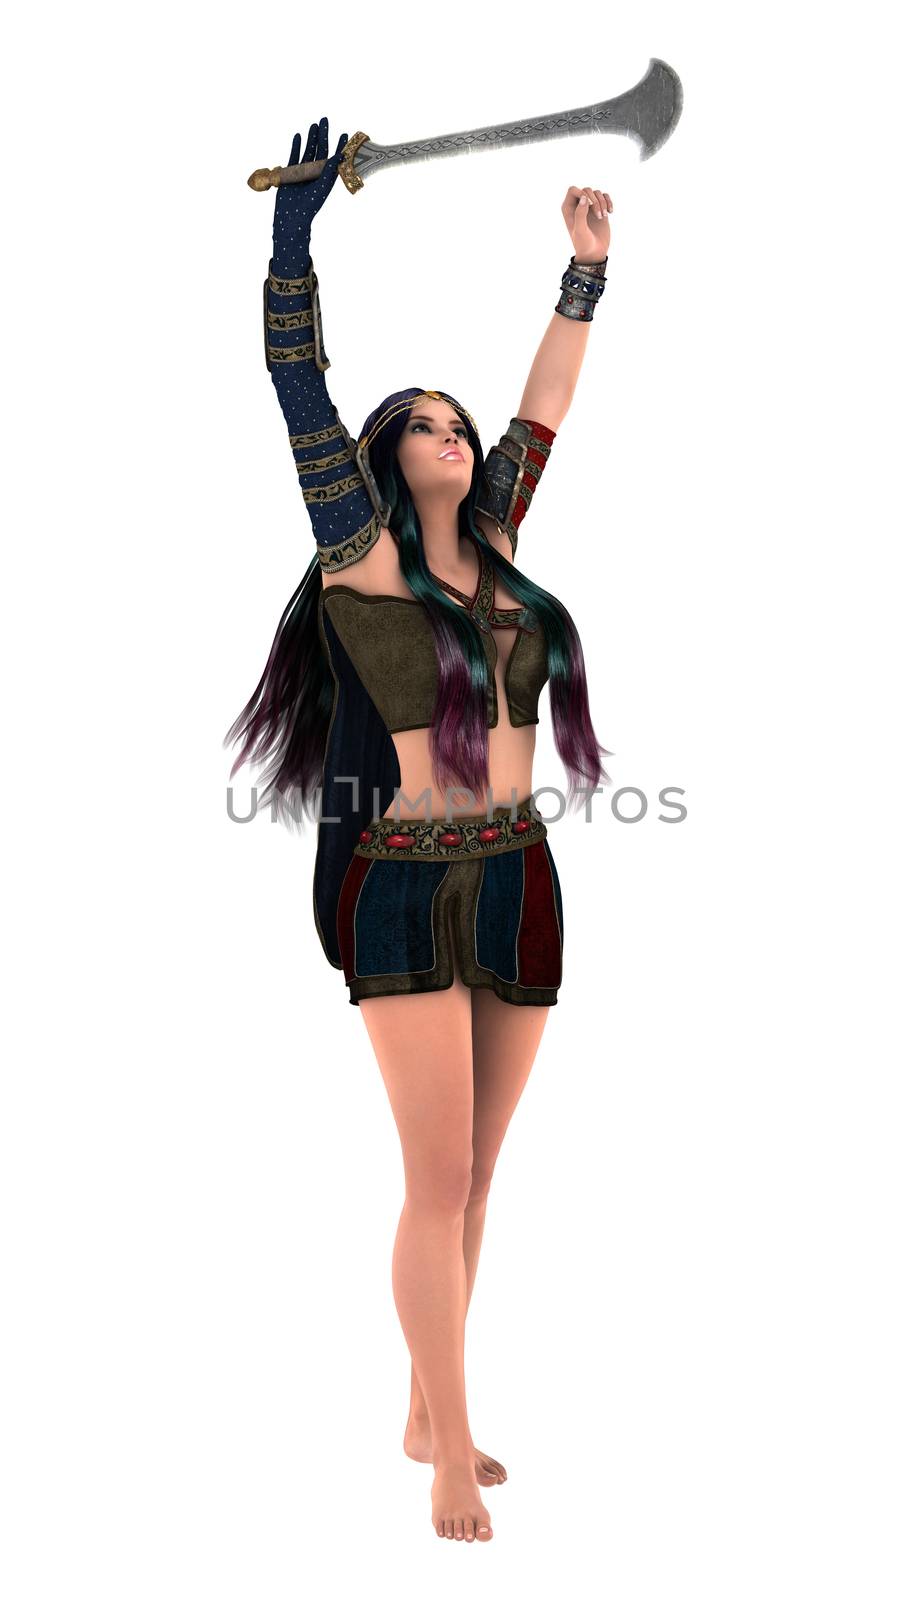 3D digital render of a beautiful warrior woman holding a sword isolated on white background